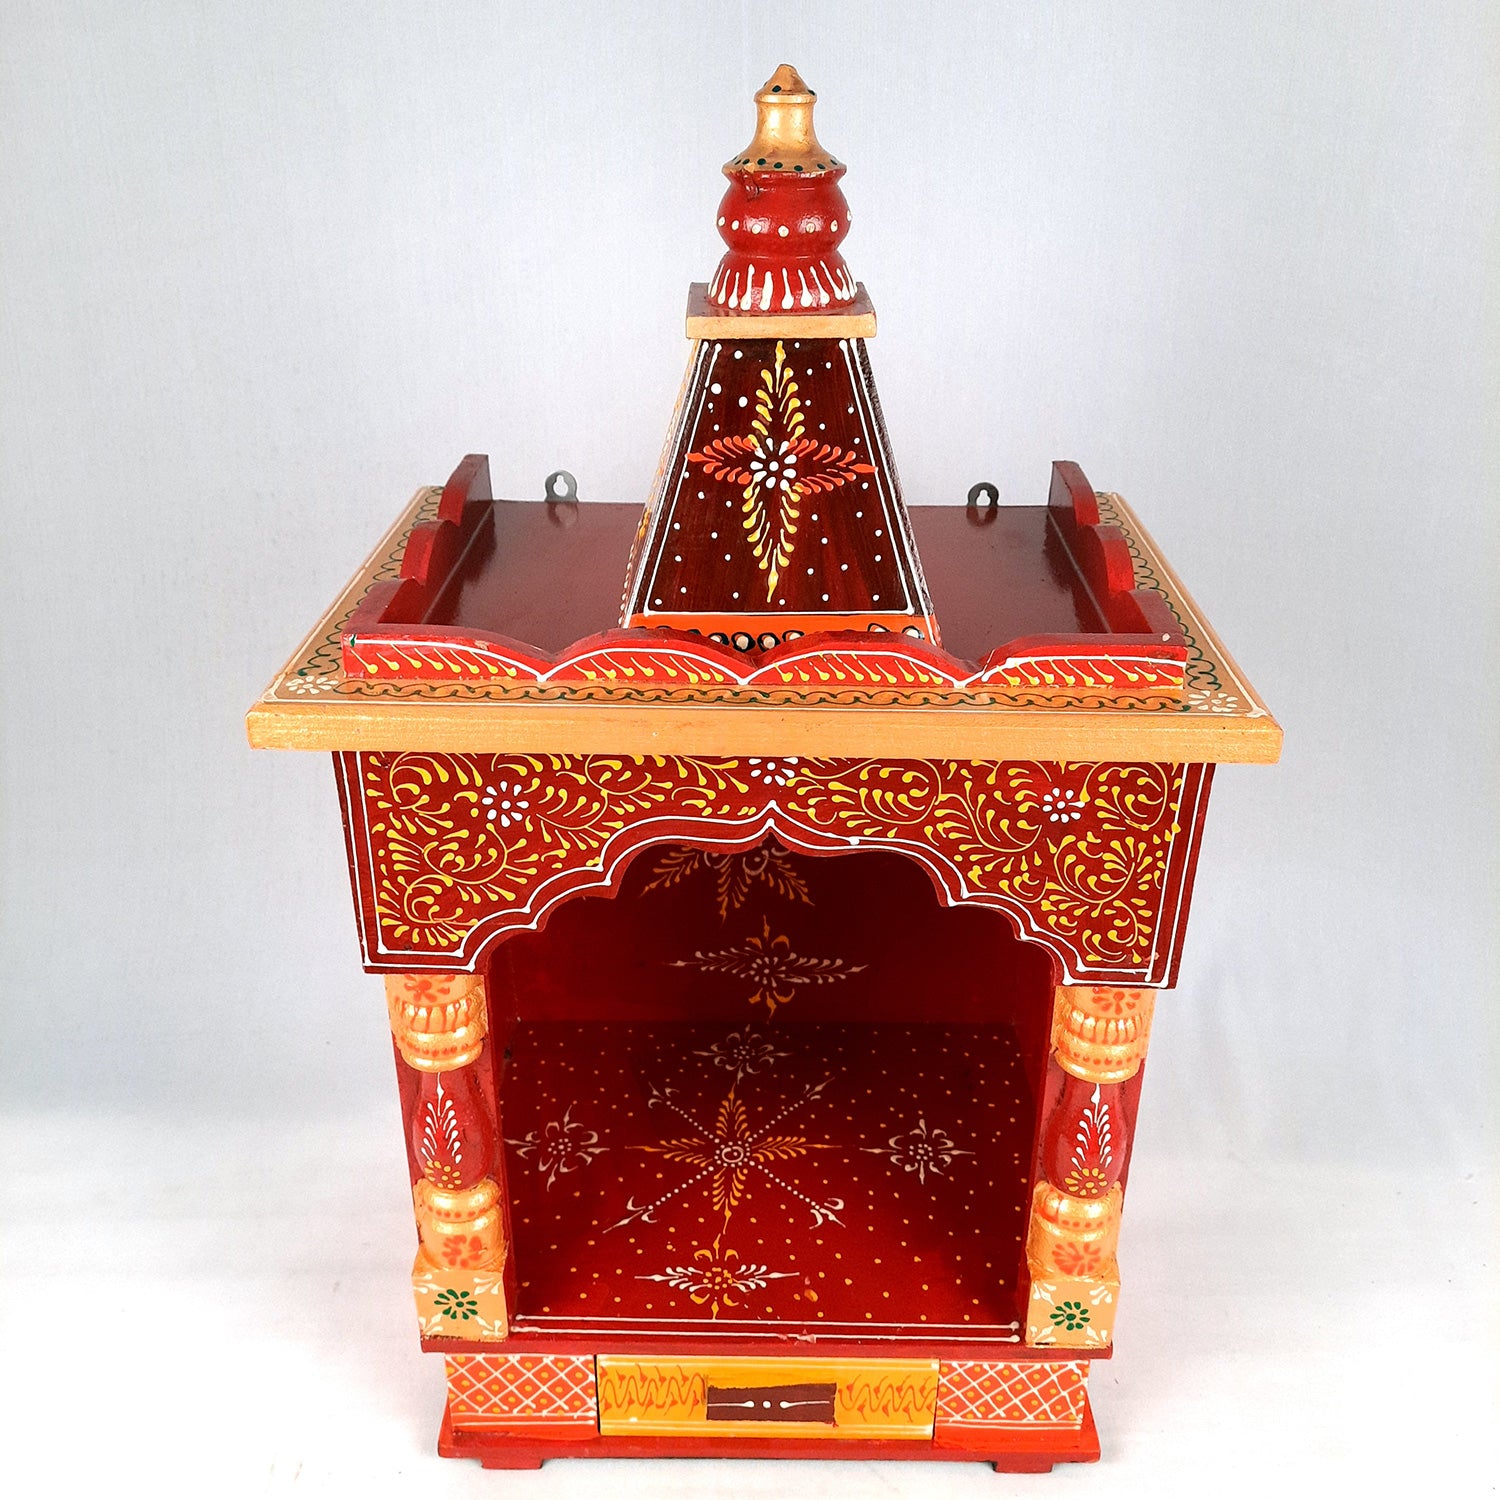 Pooja Temple Wooden With Storage Drawer | Big Mandir For Home | Puja Stand Mandap Wall Mounted – For House, Ghar, Office, Shop - 23 Inch